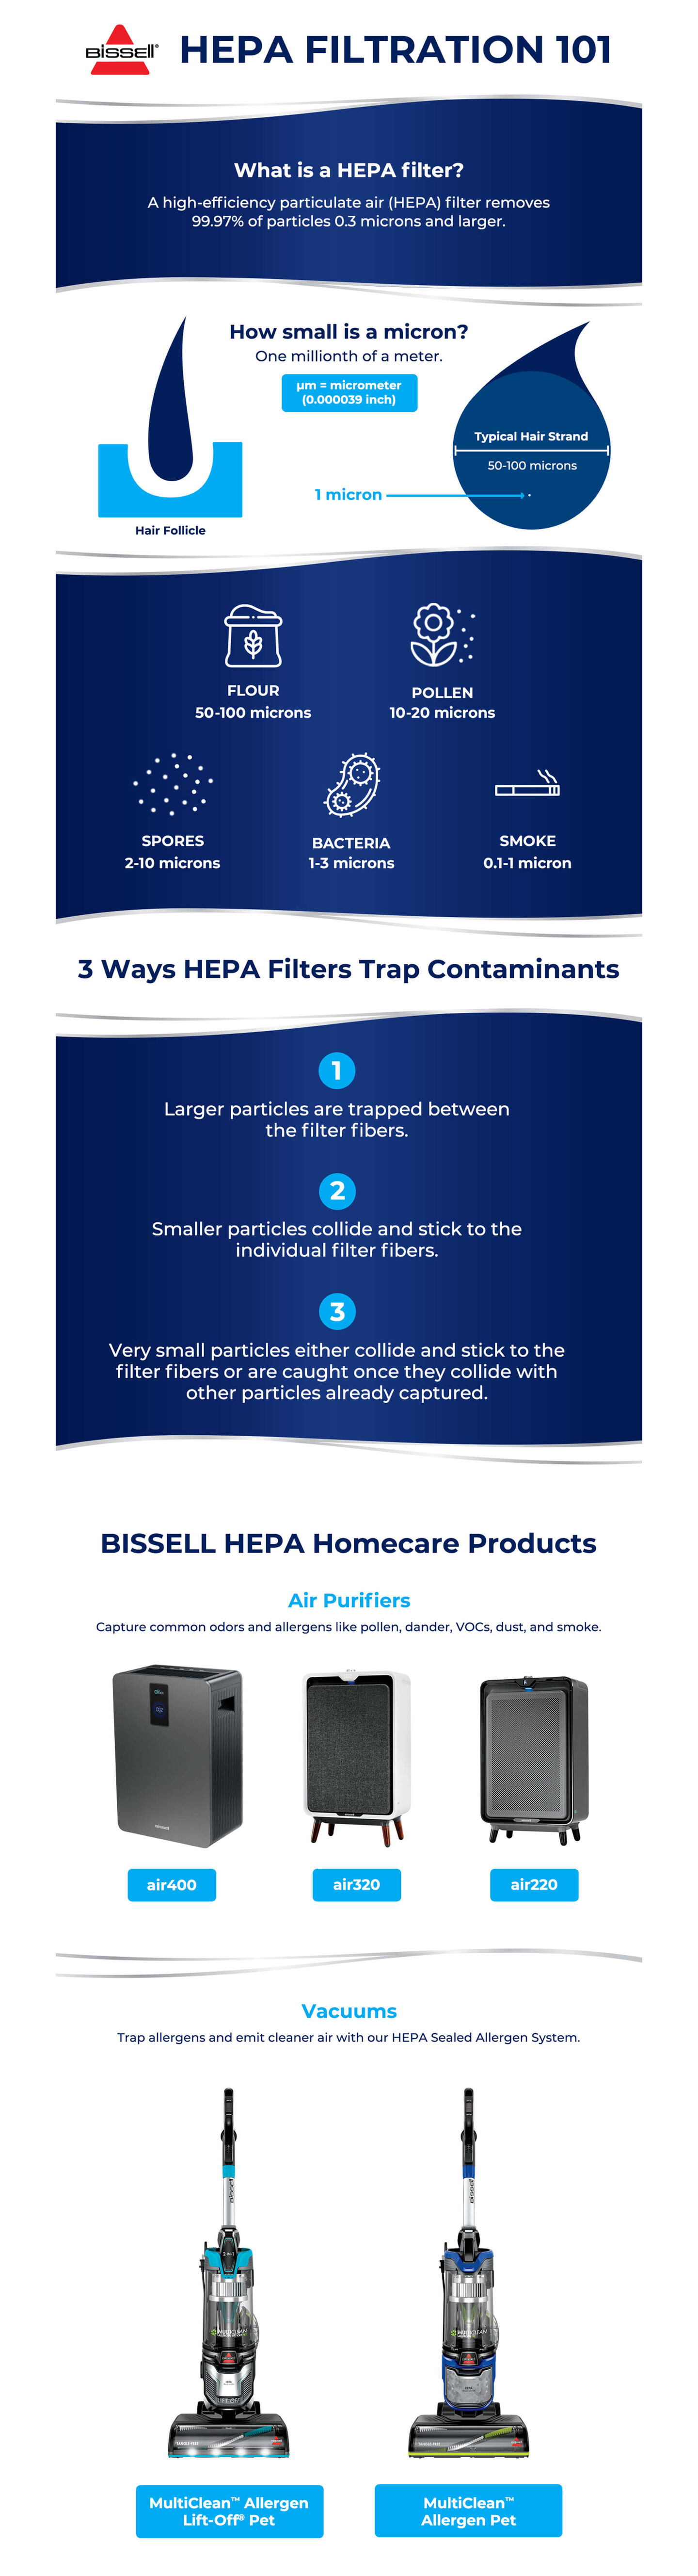 What are HEPA filters and how do it work?